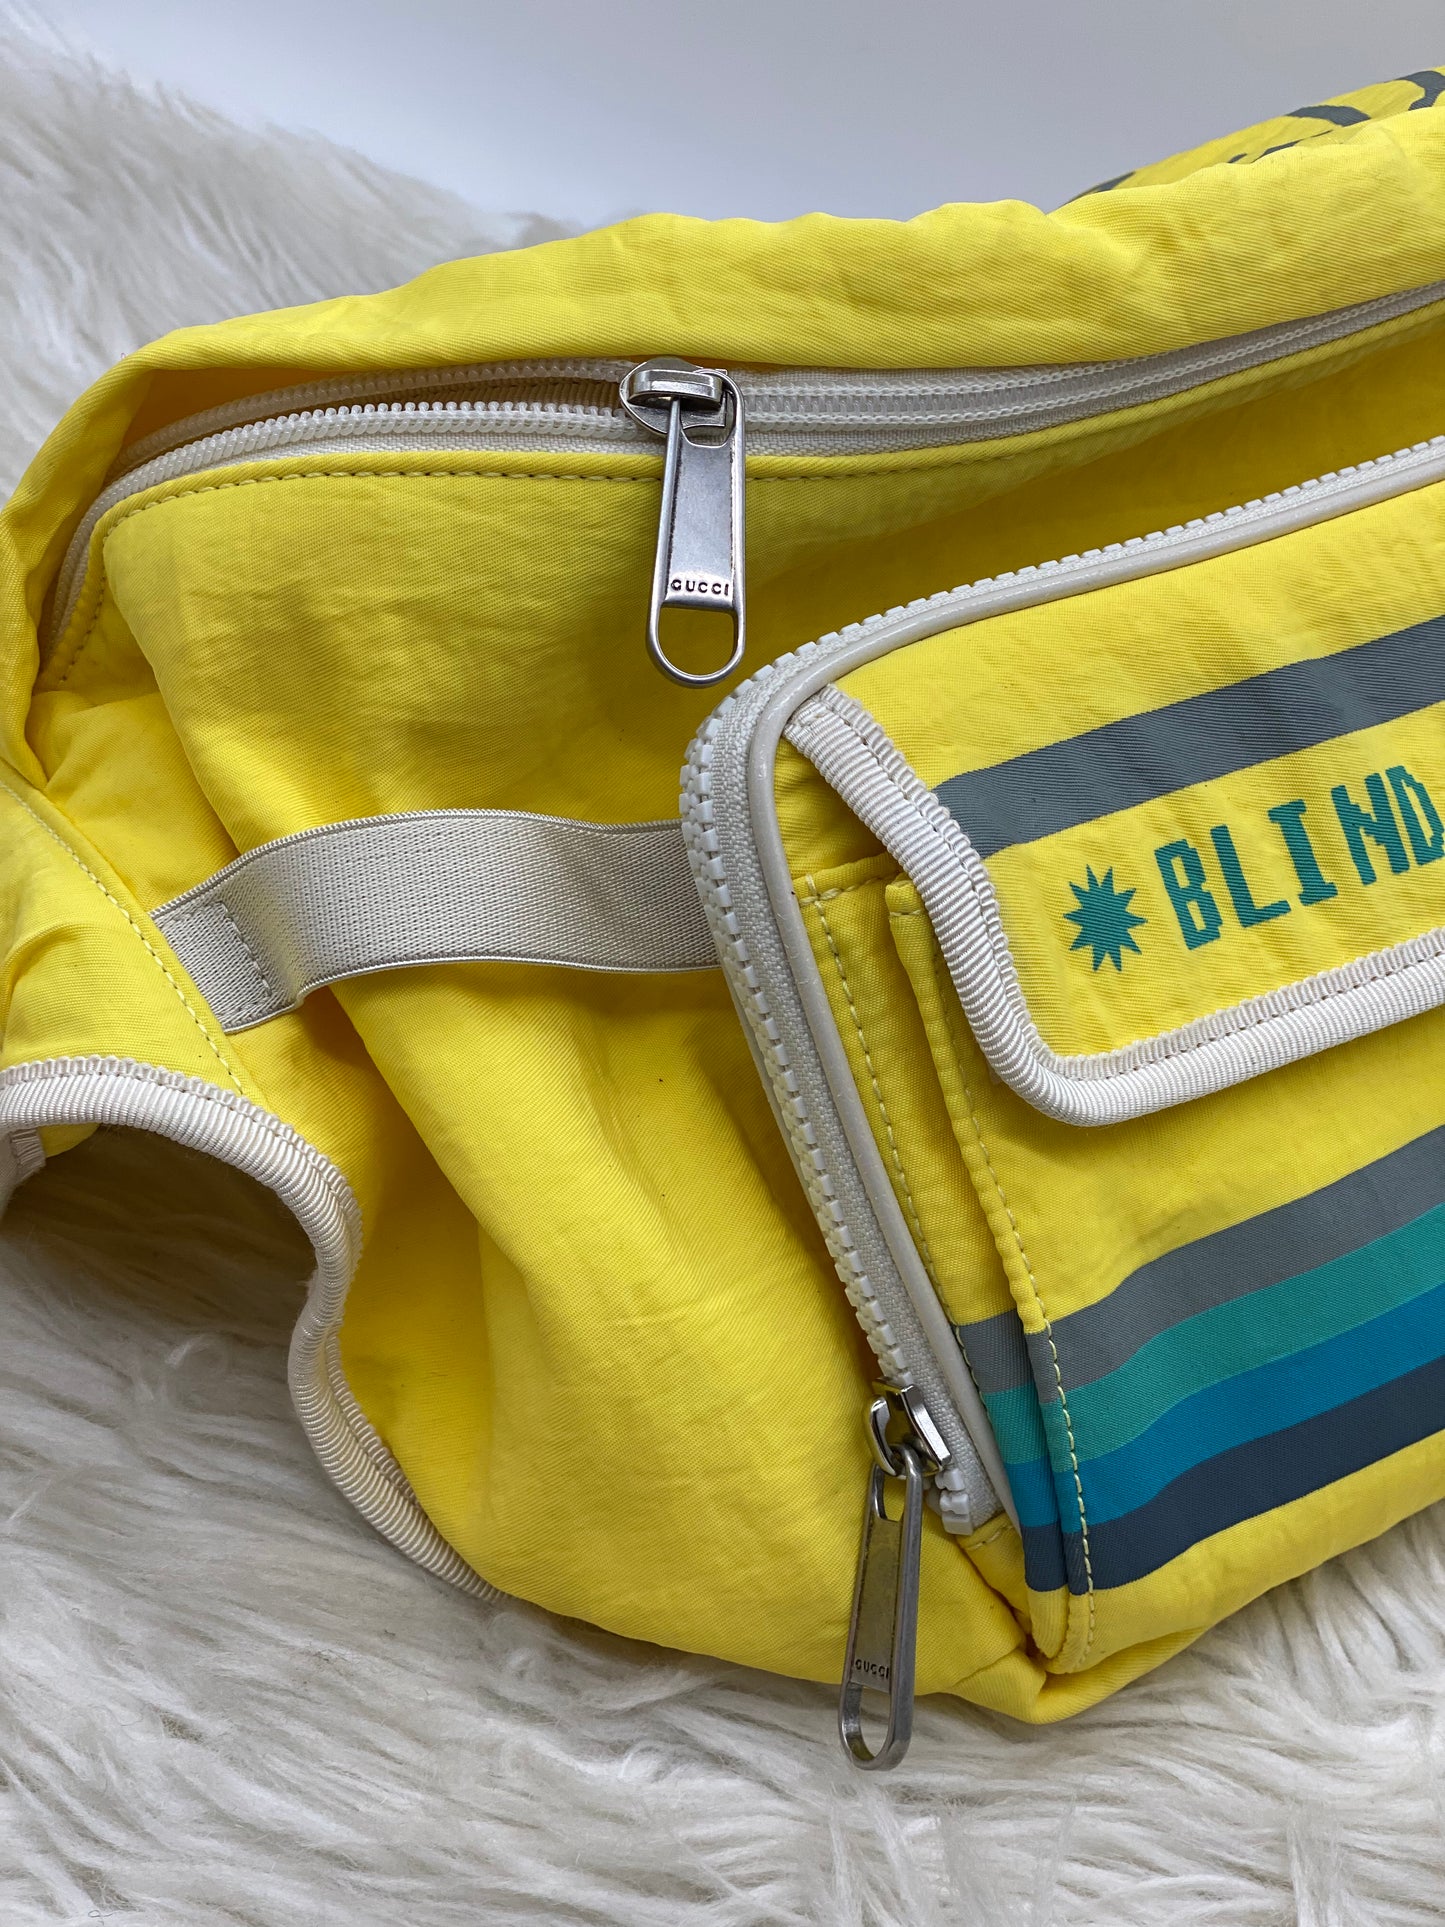 GUCCI BLIND FOR LOVE YELLOW FANNY PACK